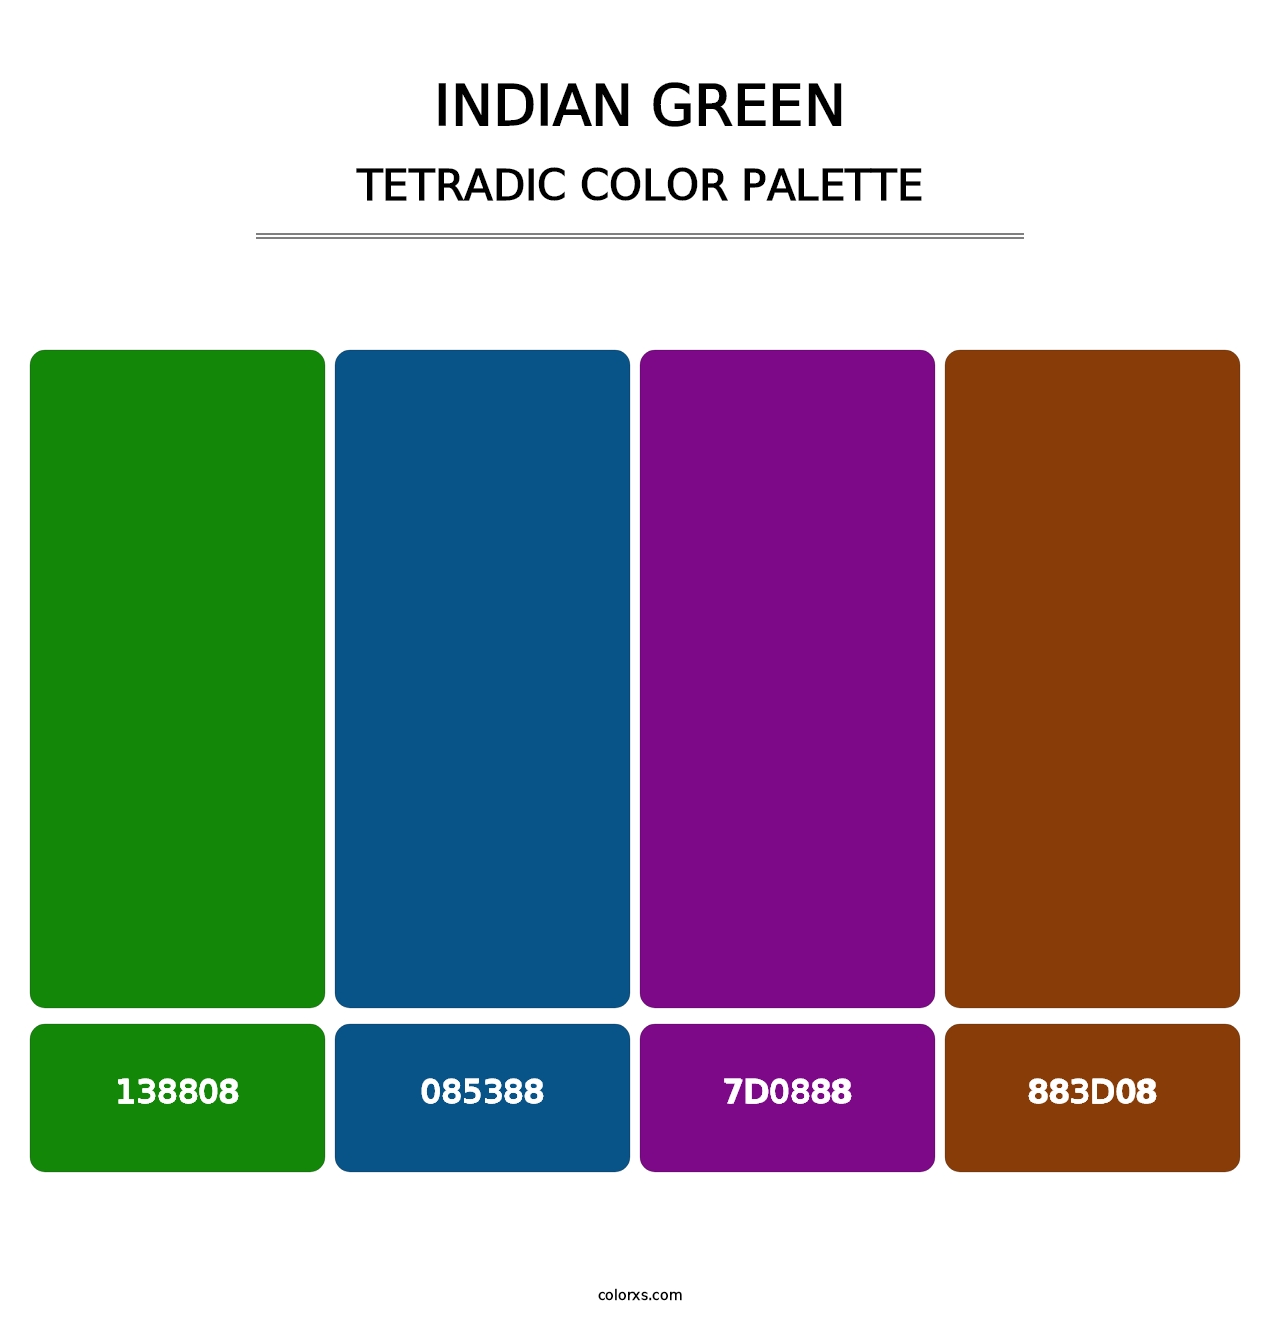 Indian Green - Tetradic Color Palette